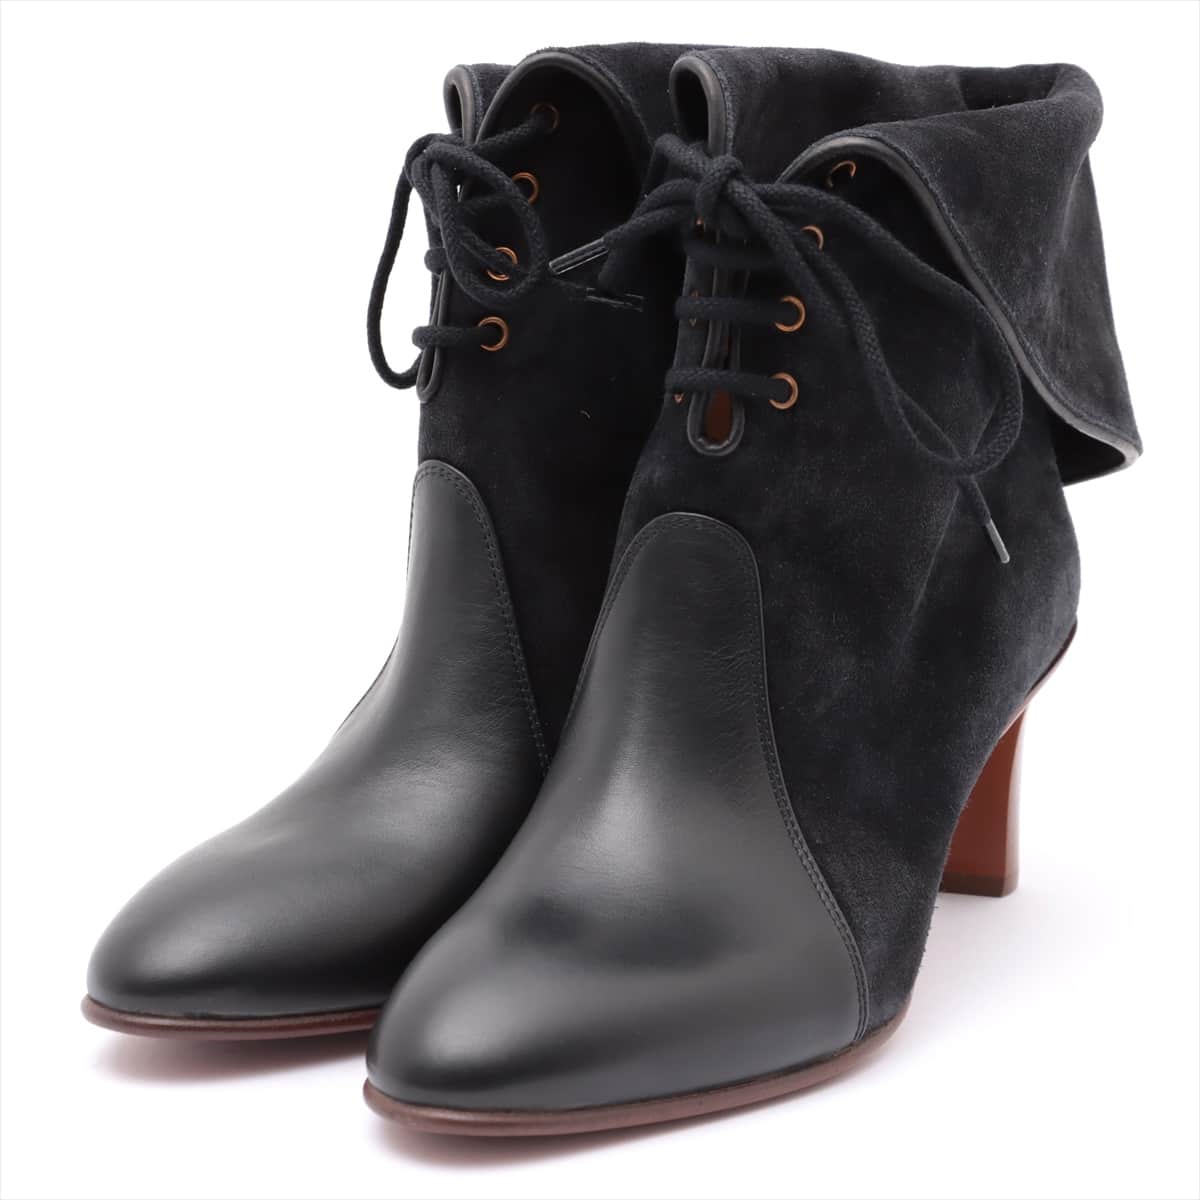 Chloe Leather & Suede Short Boots 36 Ladies' Black x Gray